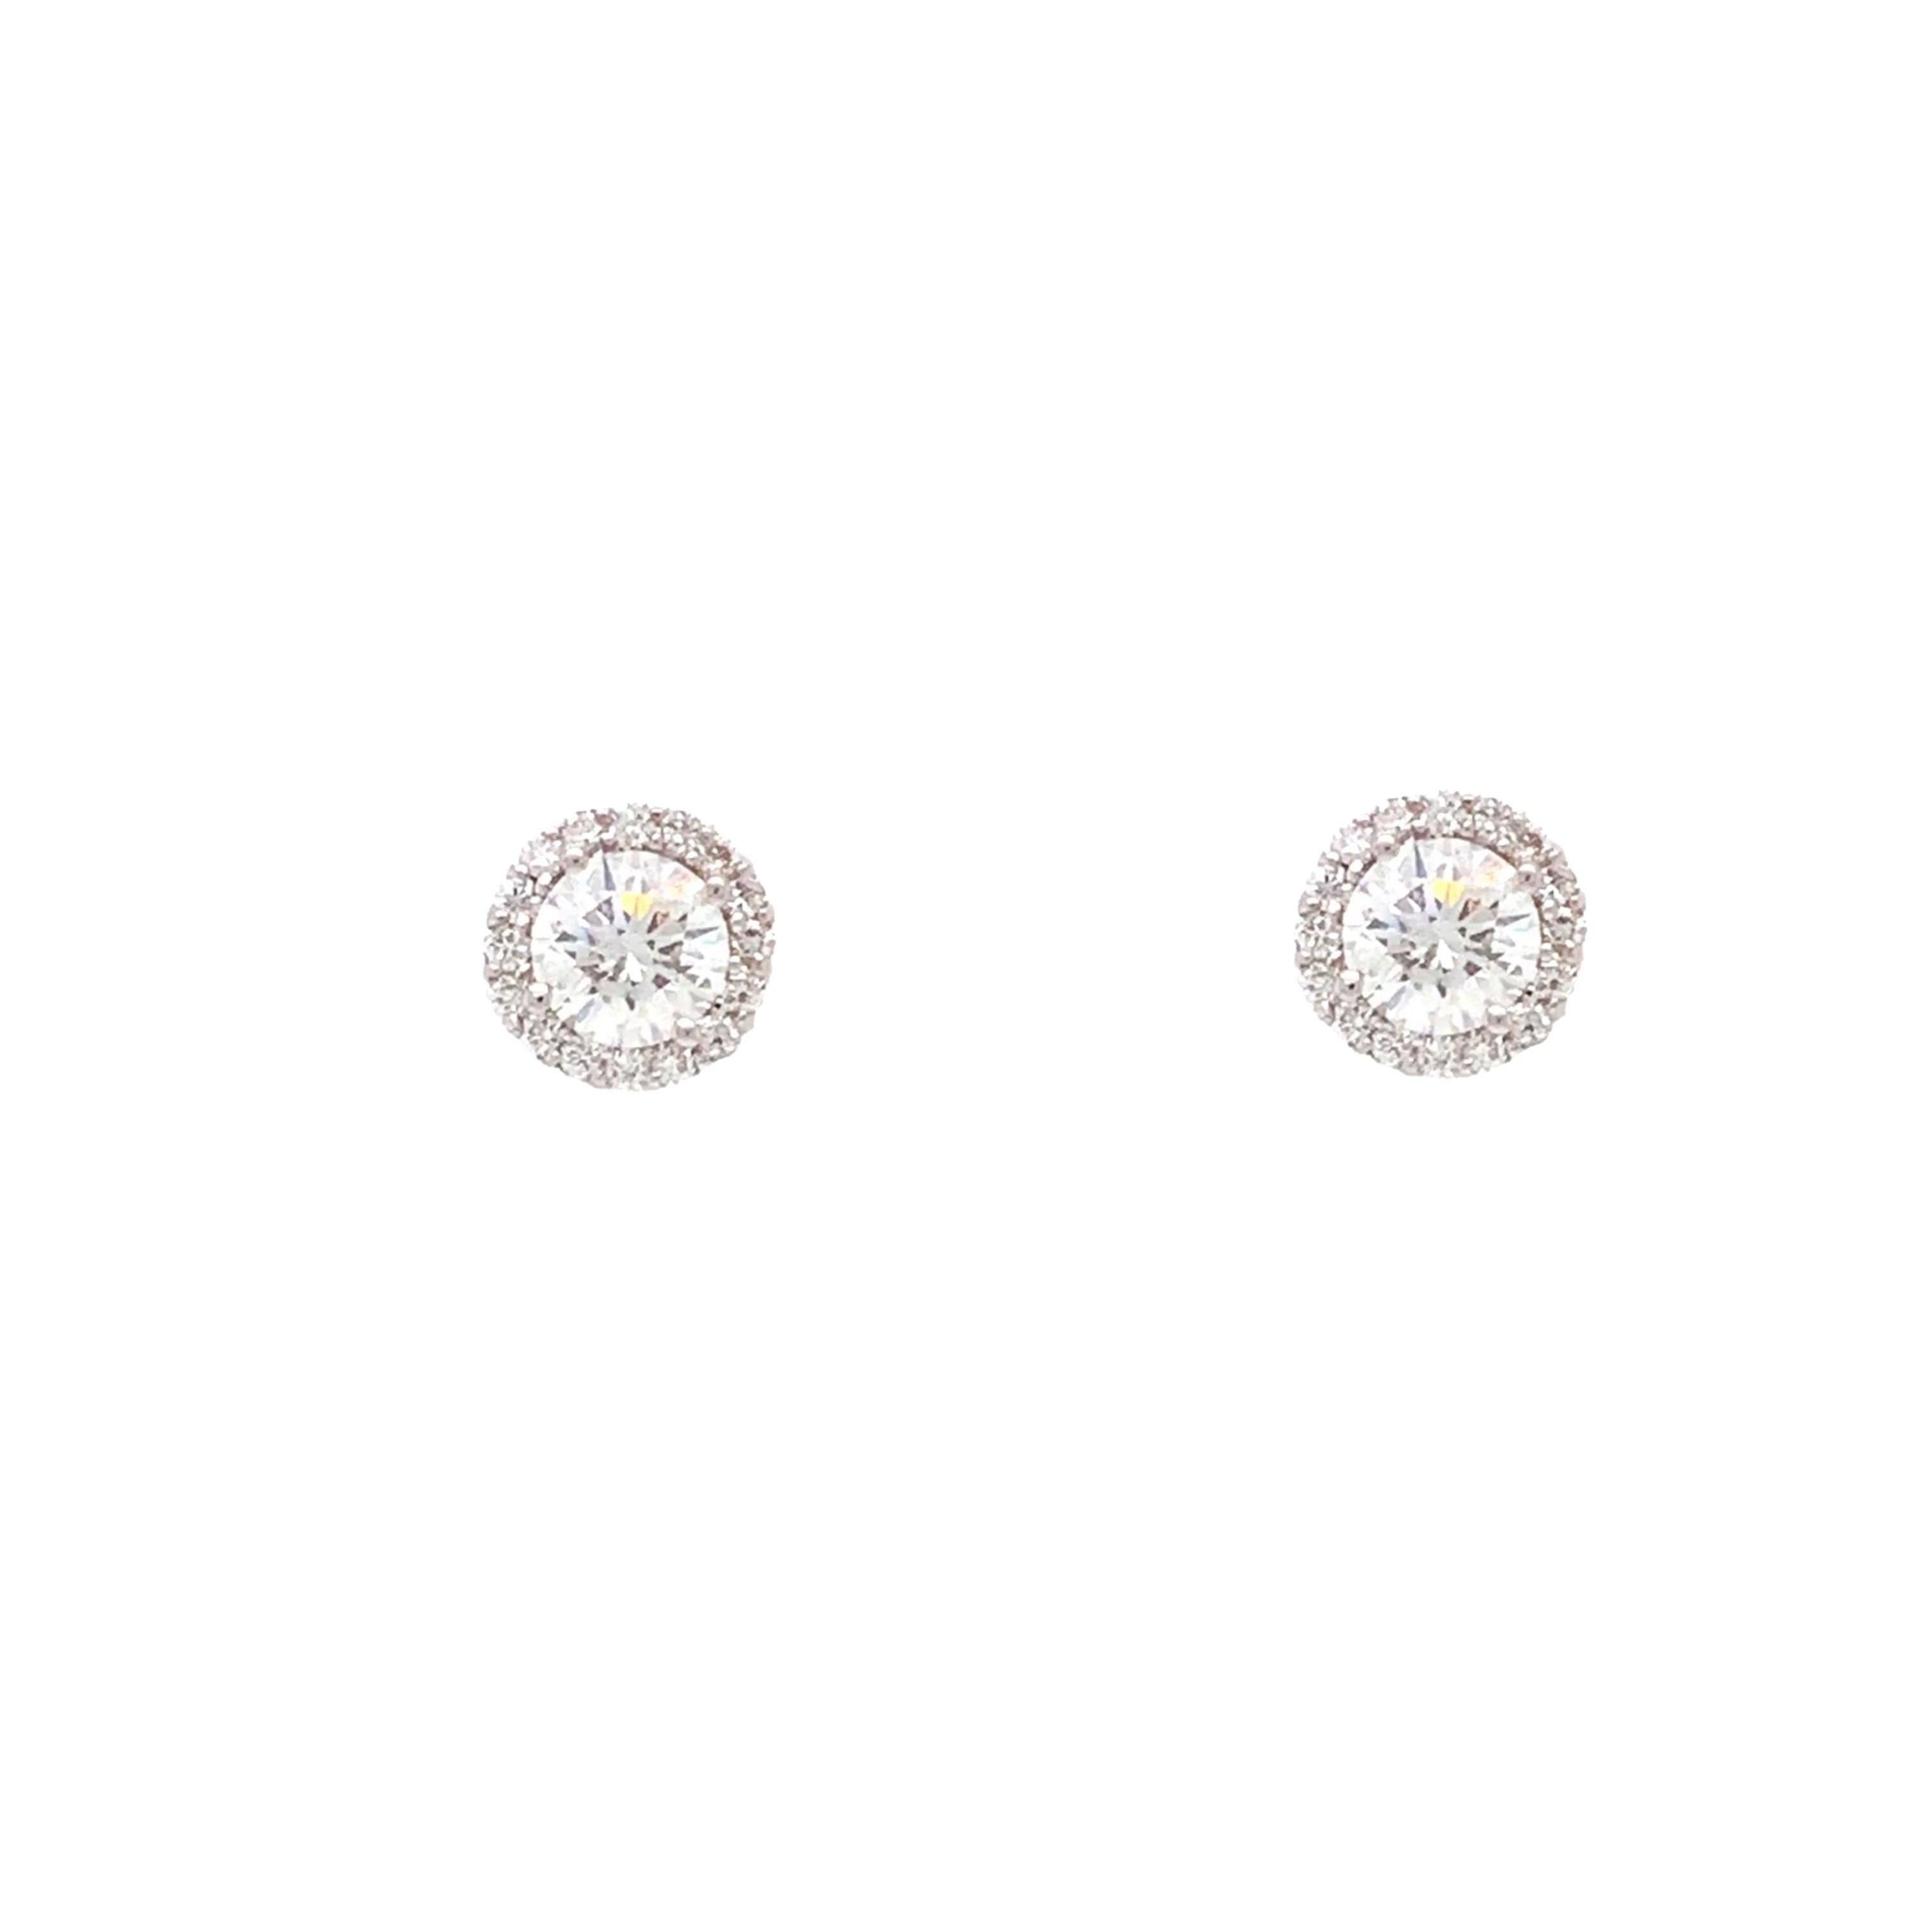 Halo Stud Round Brilliant Cut Diamond Earrings 0.85cts T.W. 18k White Gold In New Condition For Sale In Los Gatos, CA